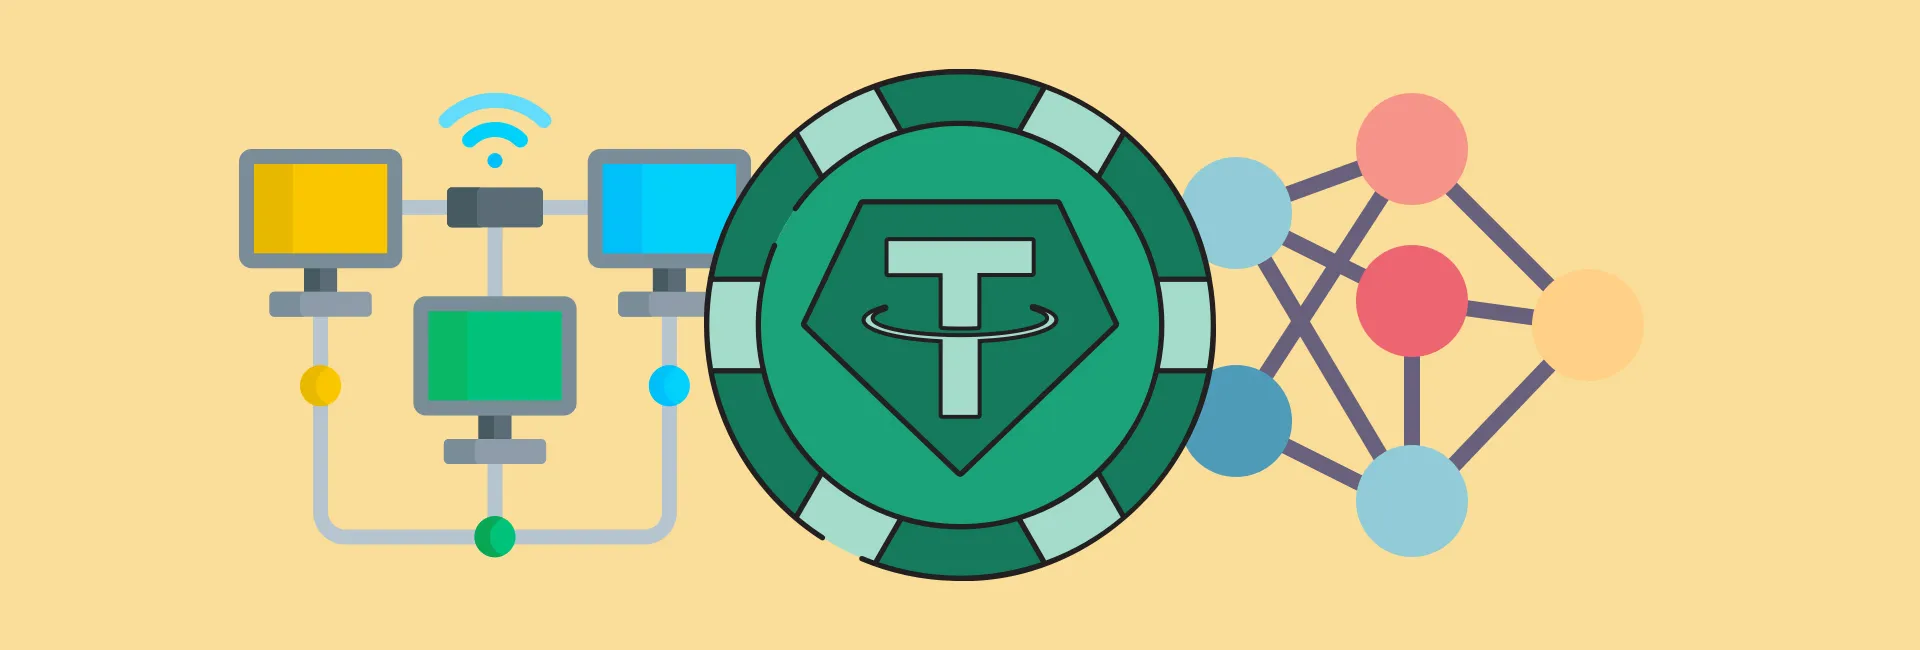 Importance of Different Networks for Tether